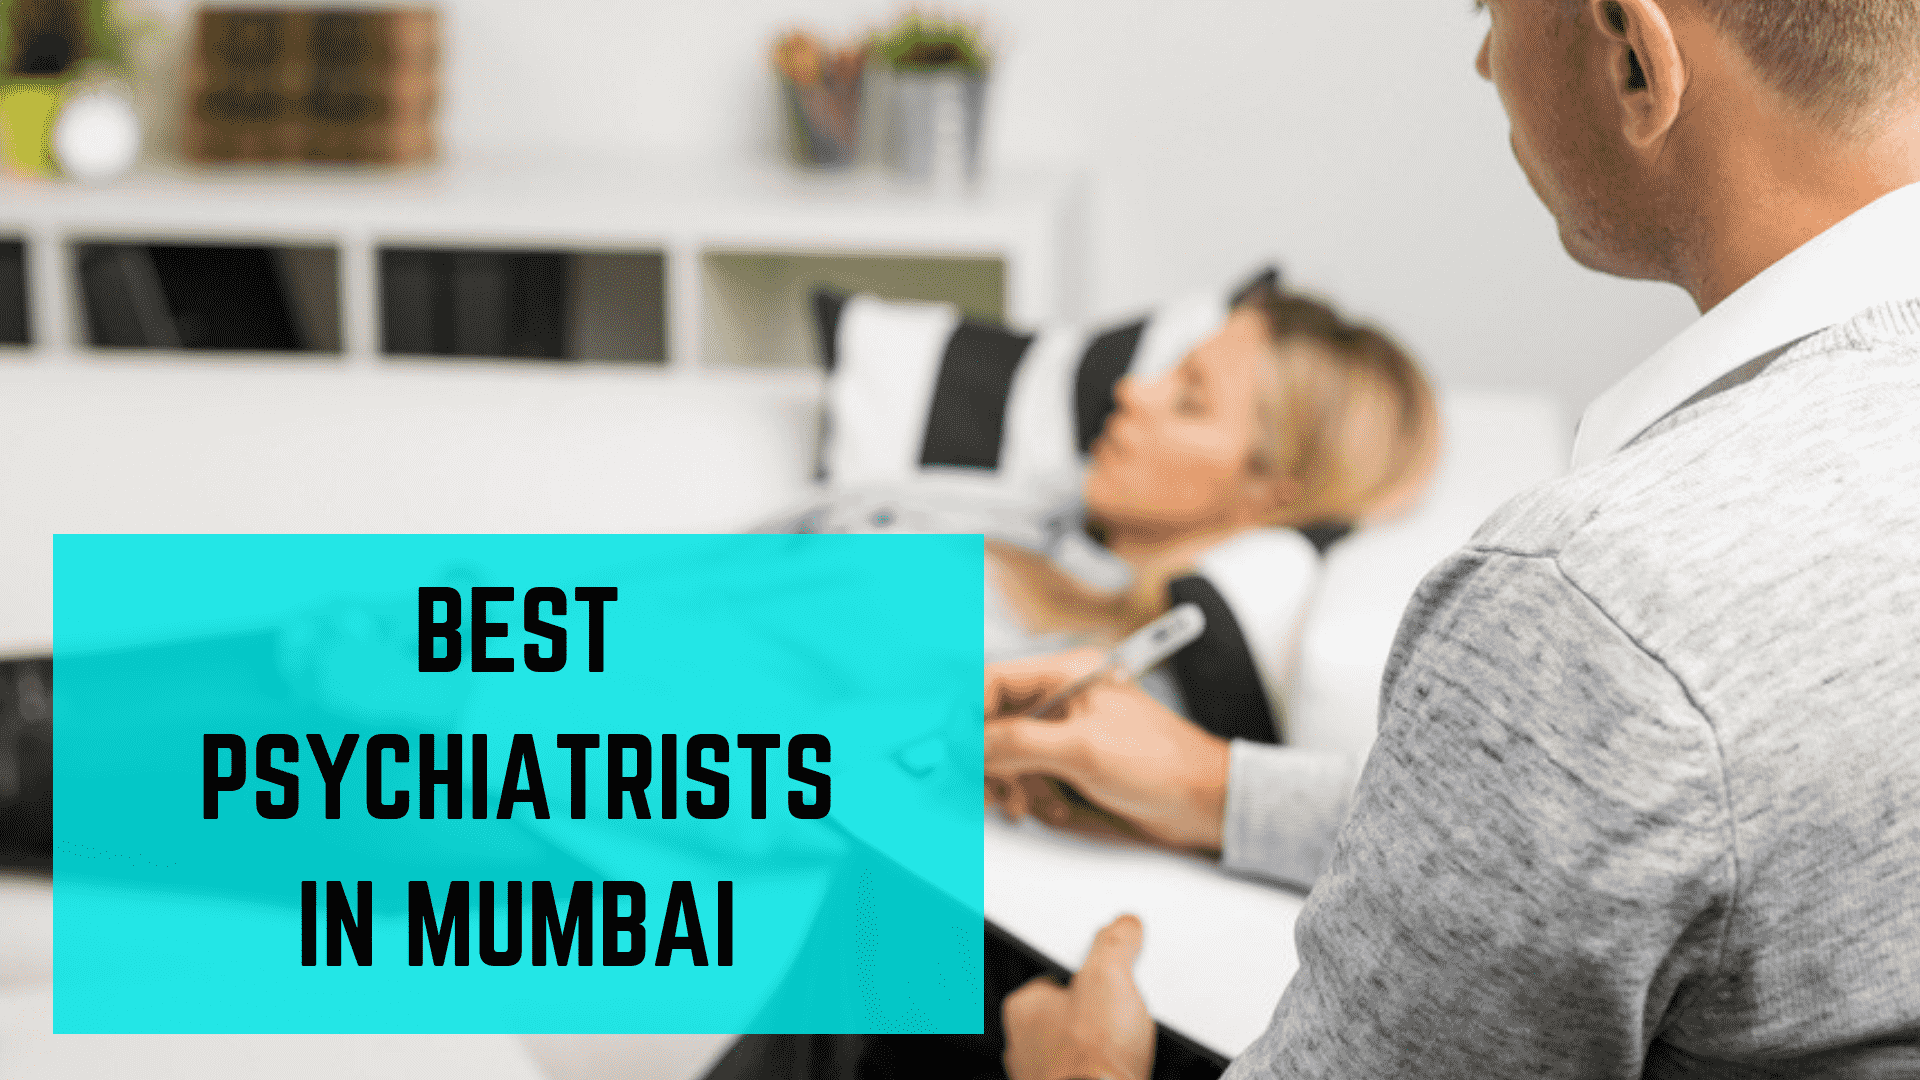 What Support Services Do Top Psychiatrists Provide Alongside Depression Treatment in Mumbai? - Gurgaon Health, Personal Trainer